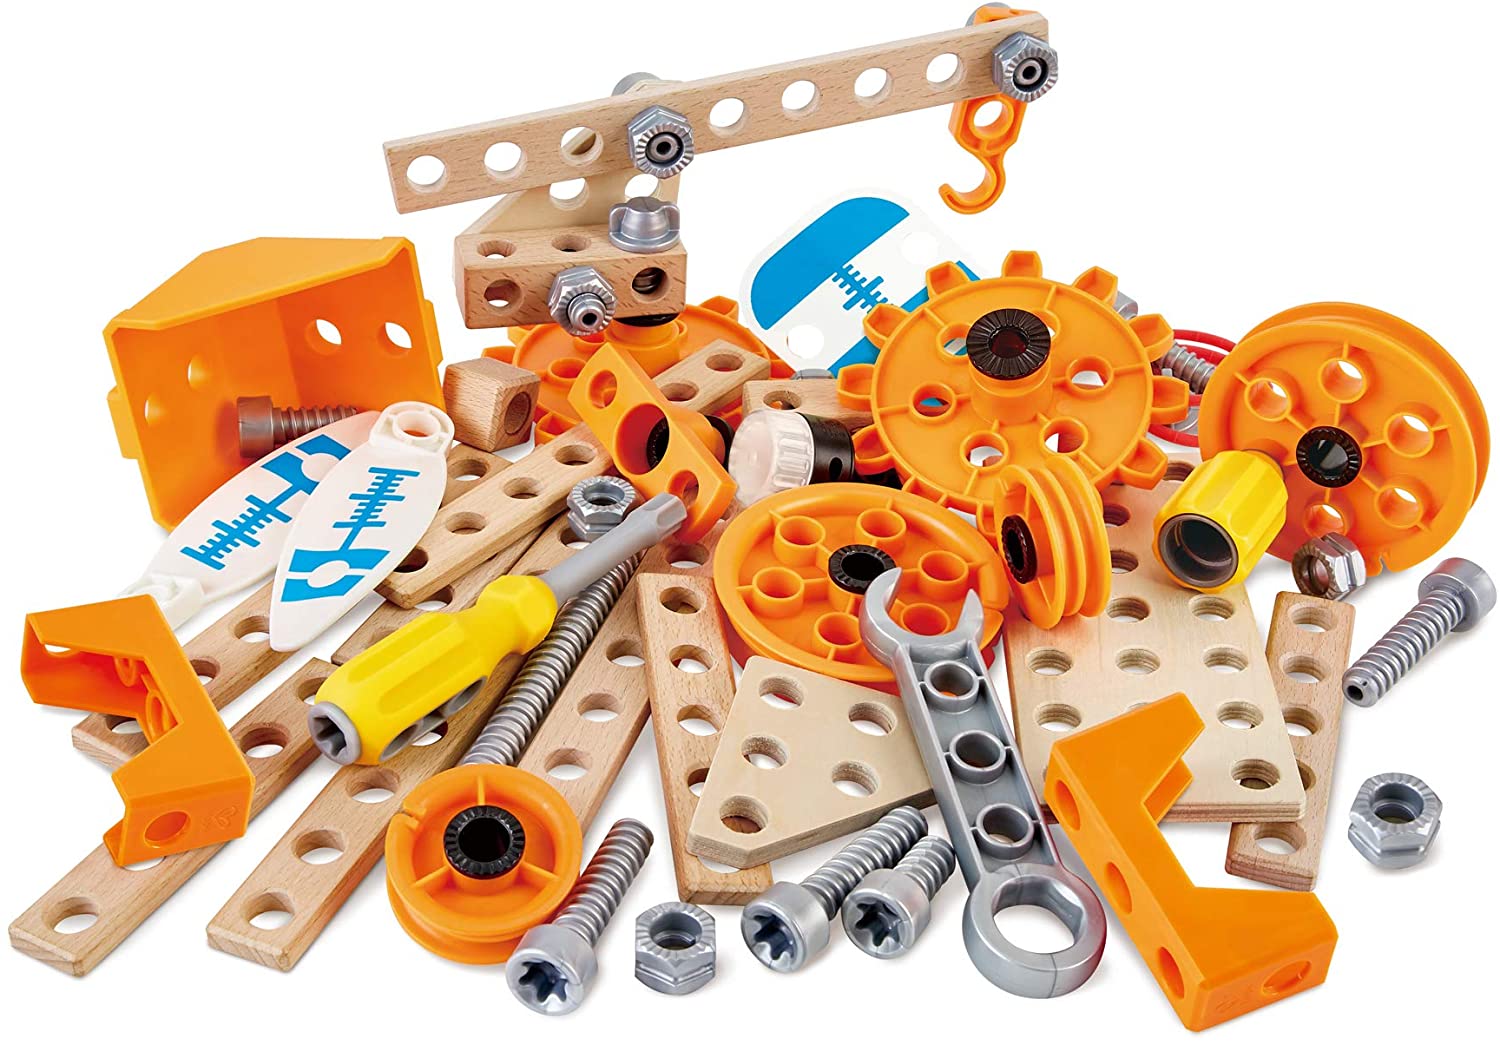 Hape Junior Inventor Deluxe Experiment Kit | 57 Piece Construction Building Toys, STEAM Science Kit for Kids 4 Years and Up (E3032A)